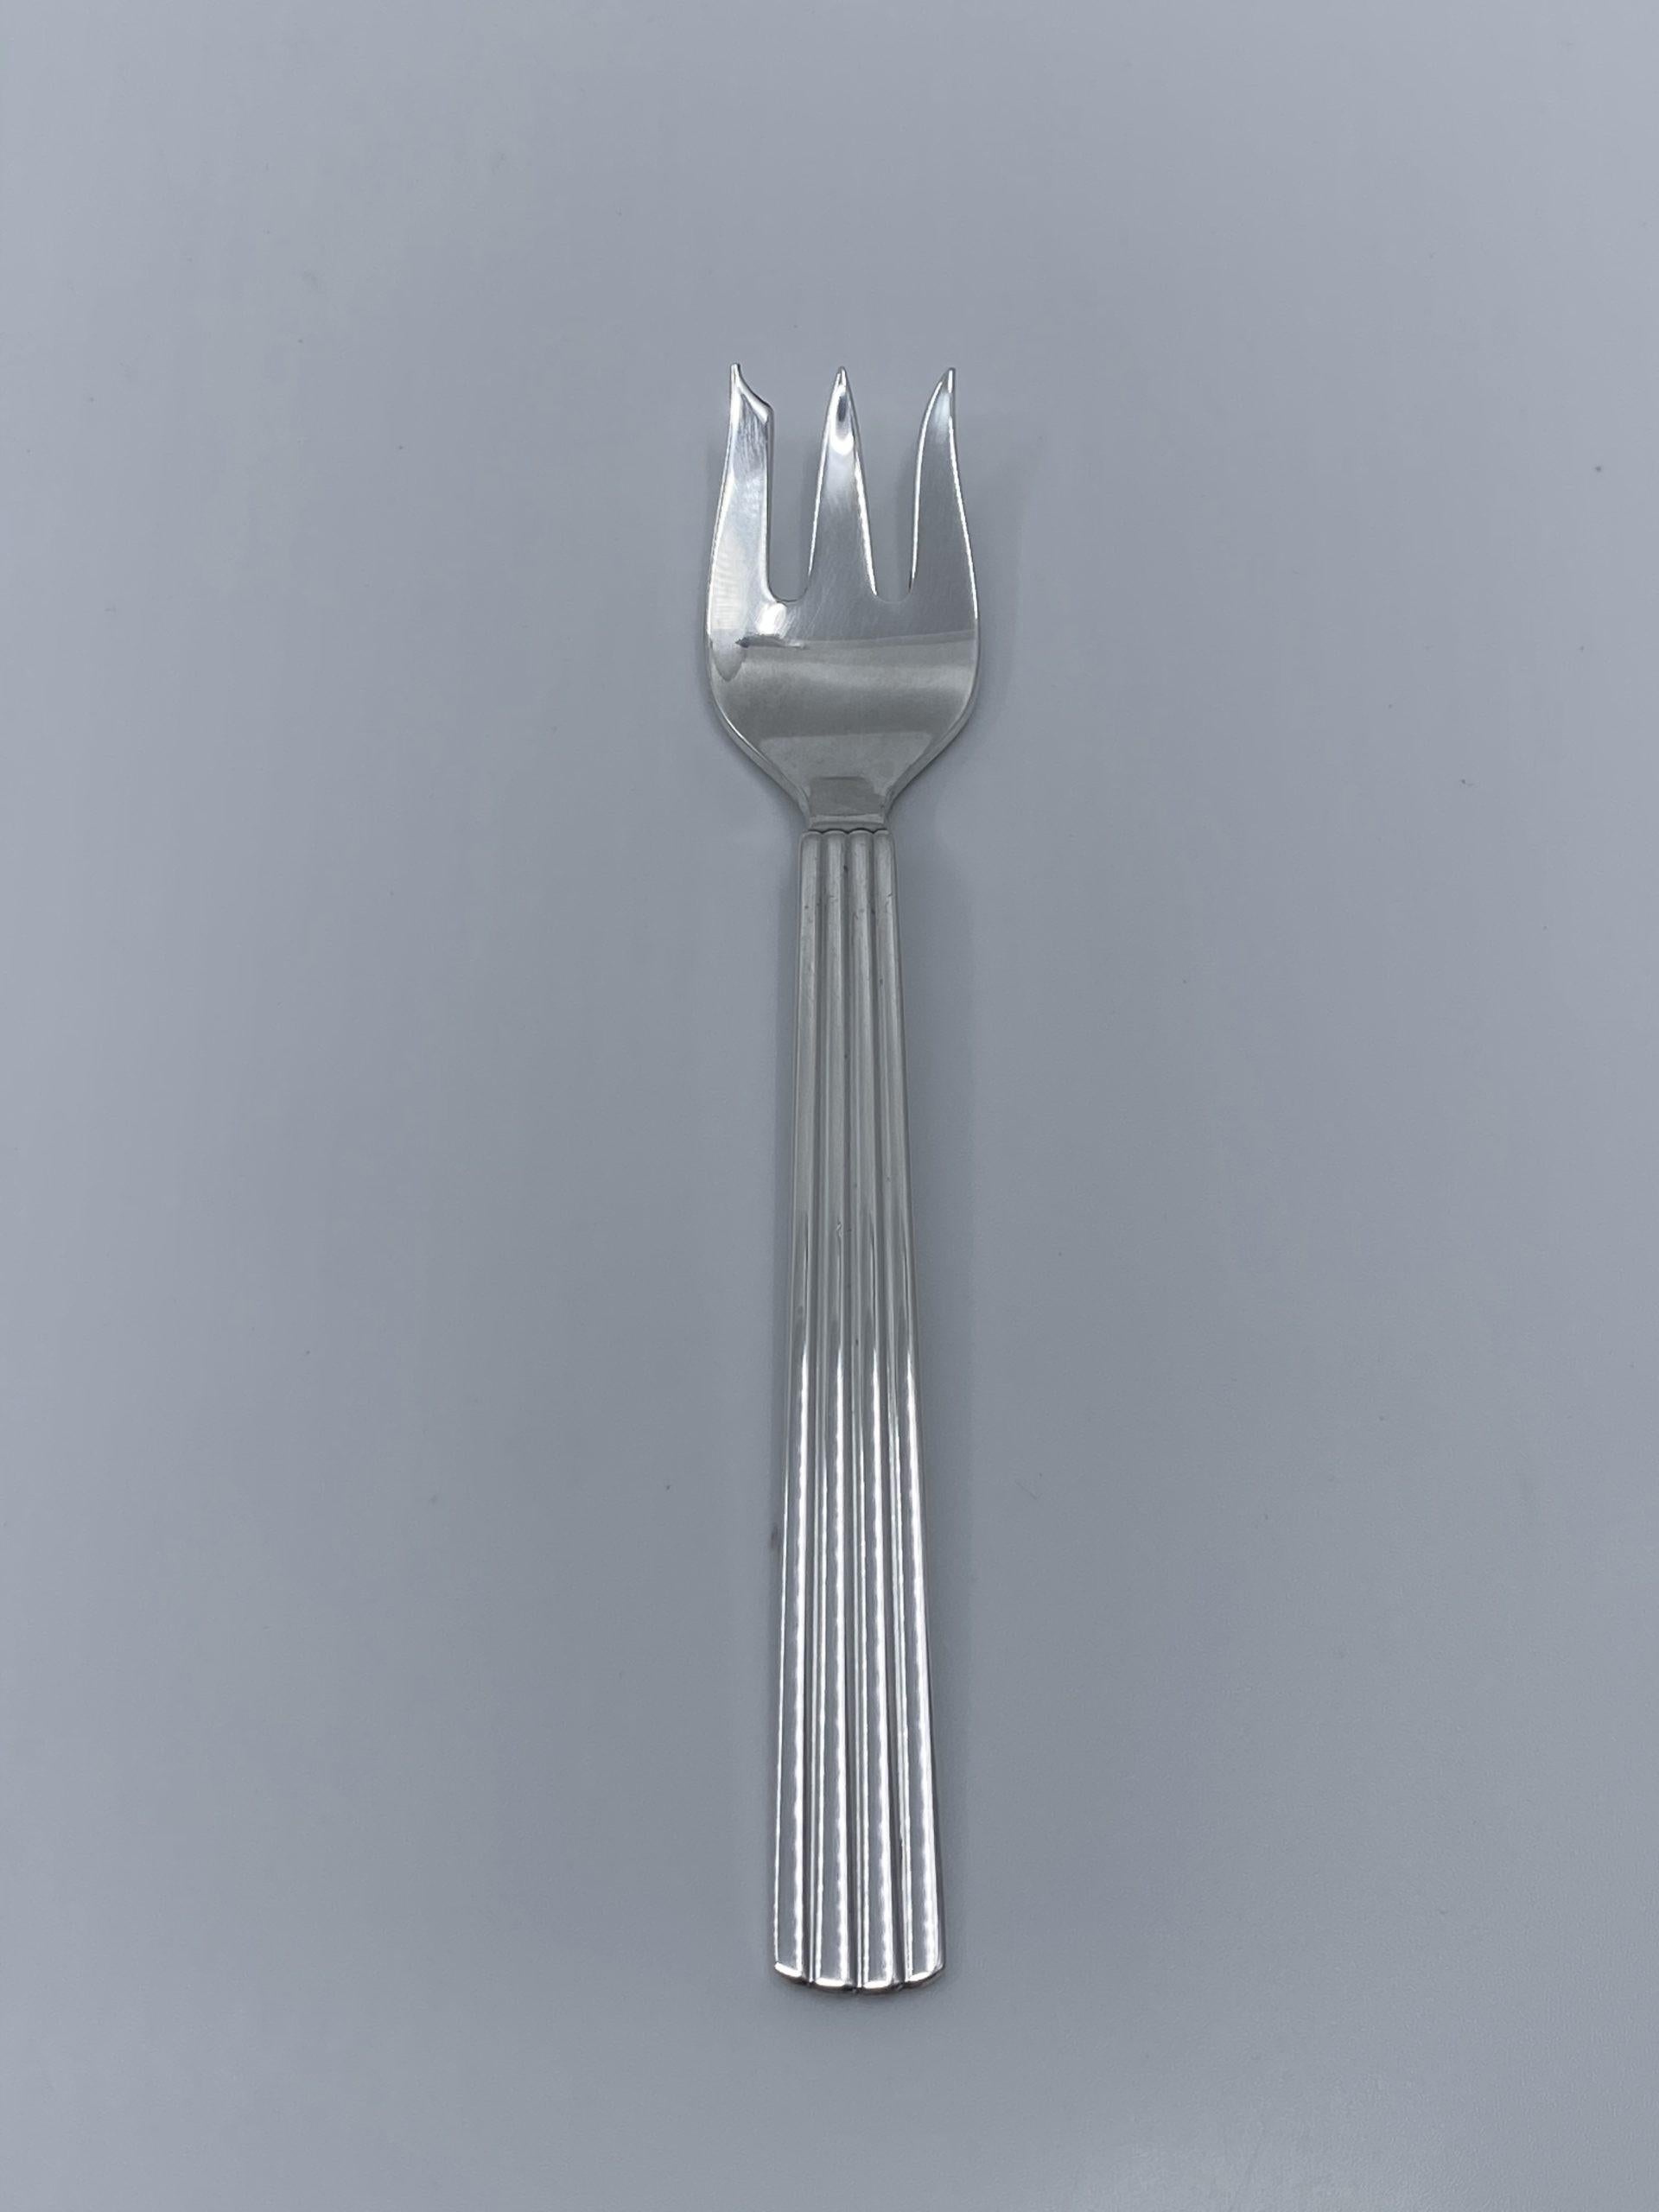 04A Georg Jensen sterling silver cake fork, item #043 in the Bernadotte pattern, design #9 by Sigvard Bernadotte from 1939.

Additional information:
Material: Sterling silver
Styles: Art Deco
Hallmarks: With Georg Jensen hallmark, made in